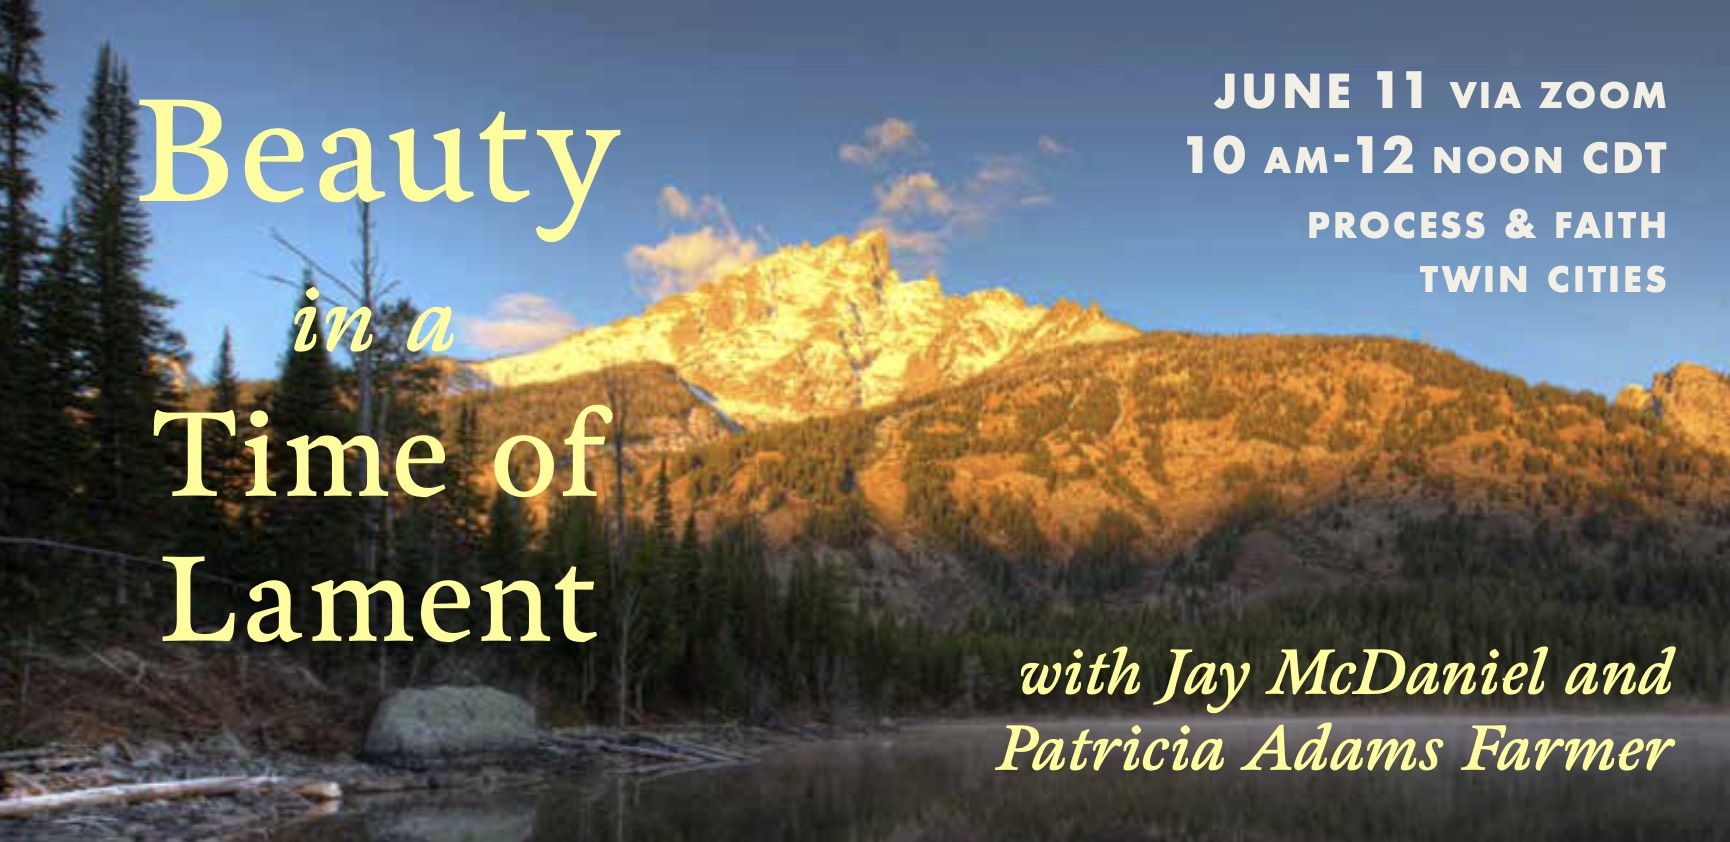 Beauty in a Time of Lament with Jay McDaniel and Patricia Adams Farmer (Process & Faith Twin Cities)